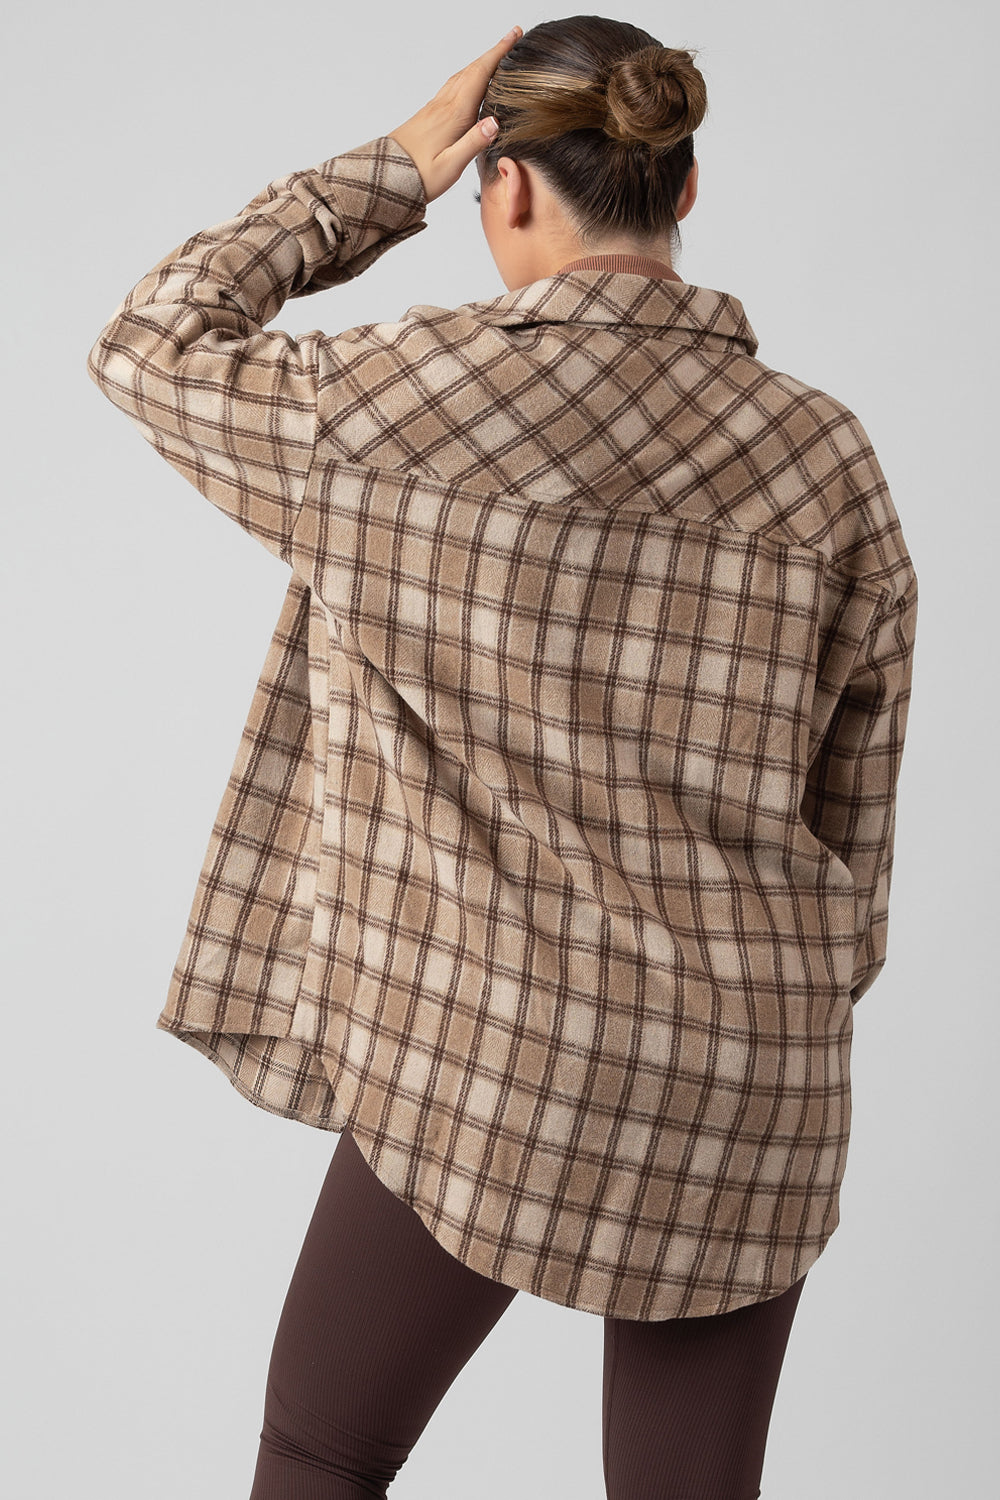 CHECK SHIRT IN CAMEL WITH BUTTON FASTENING